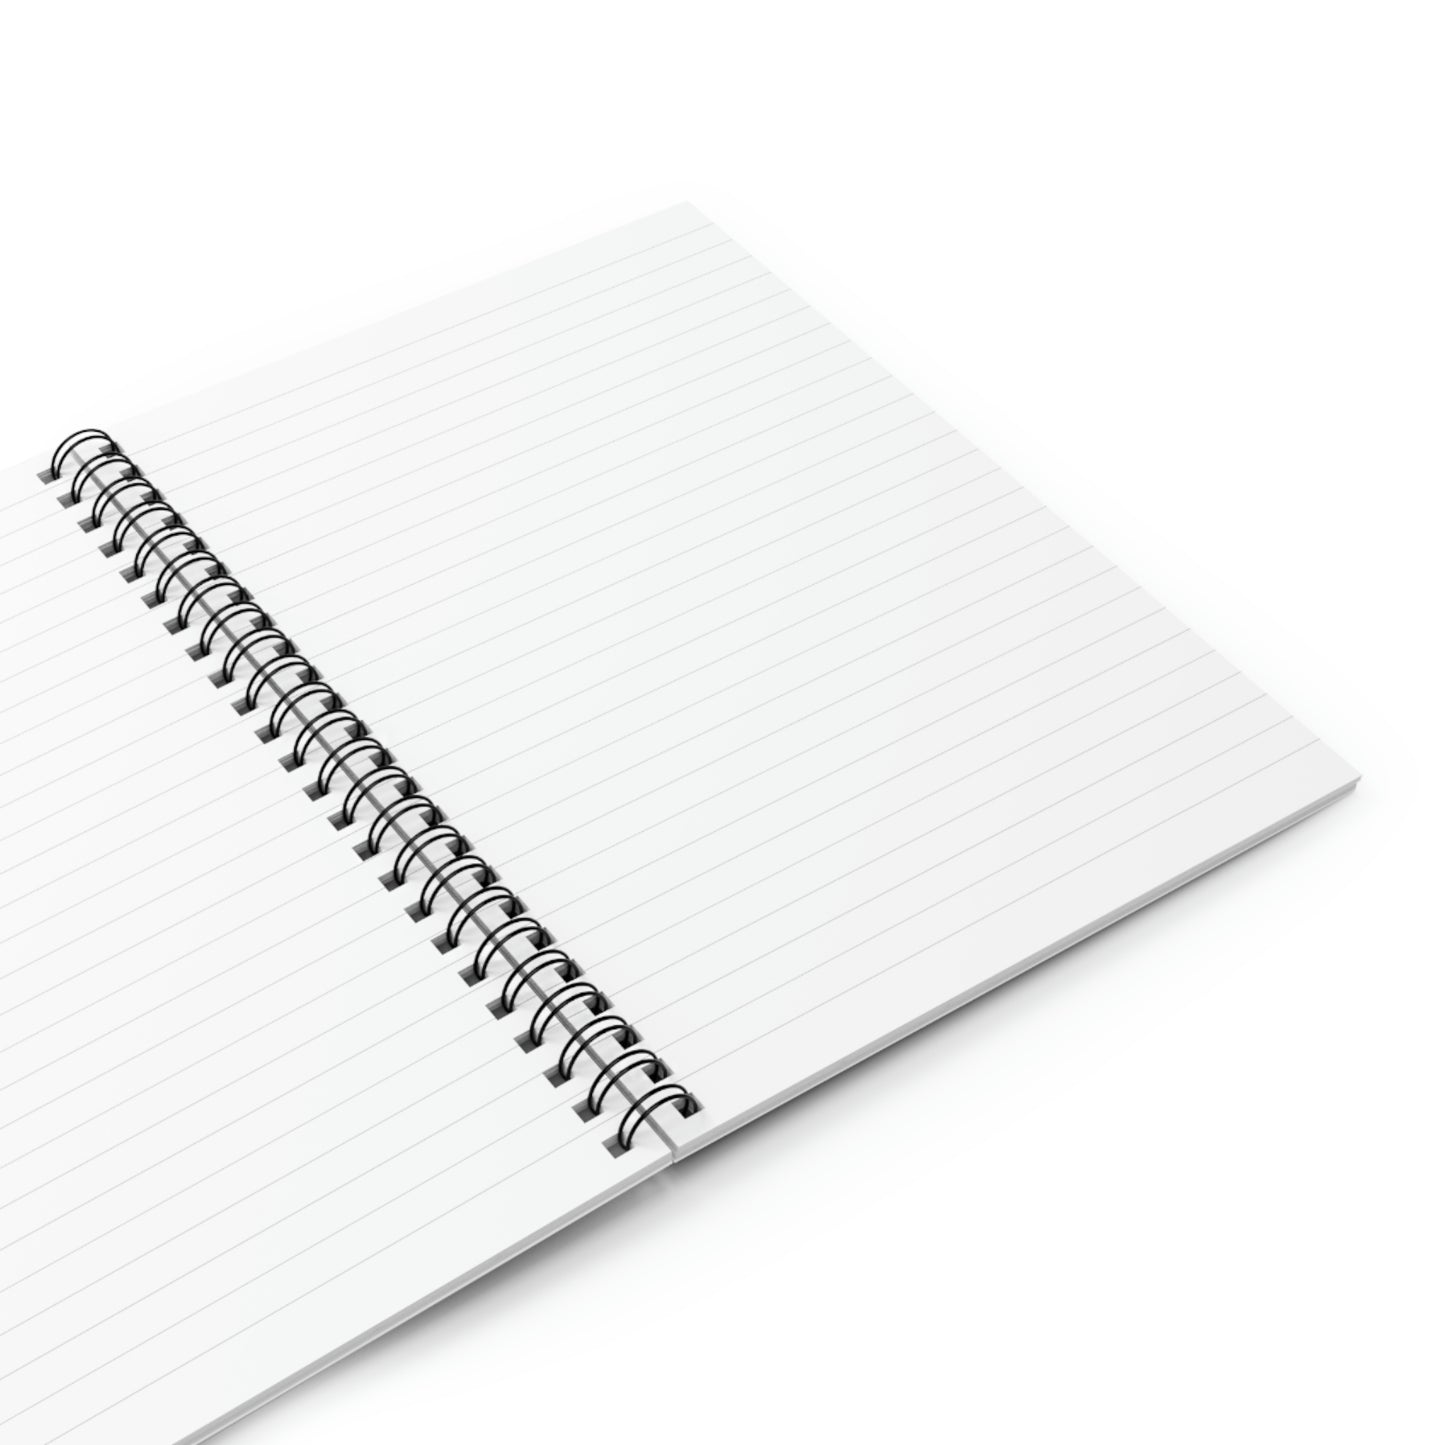 The Secret P of Purposeful Hourly Rounding Spiral Notebook - Ruled Line! Nurse Gift! Nursing Assistant Gift! SNF or Hospital!